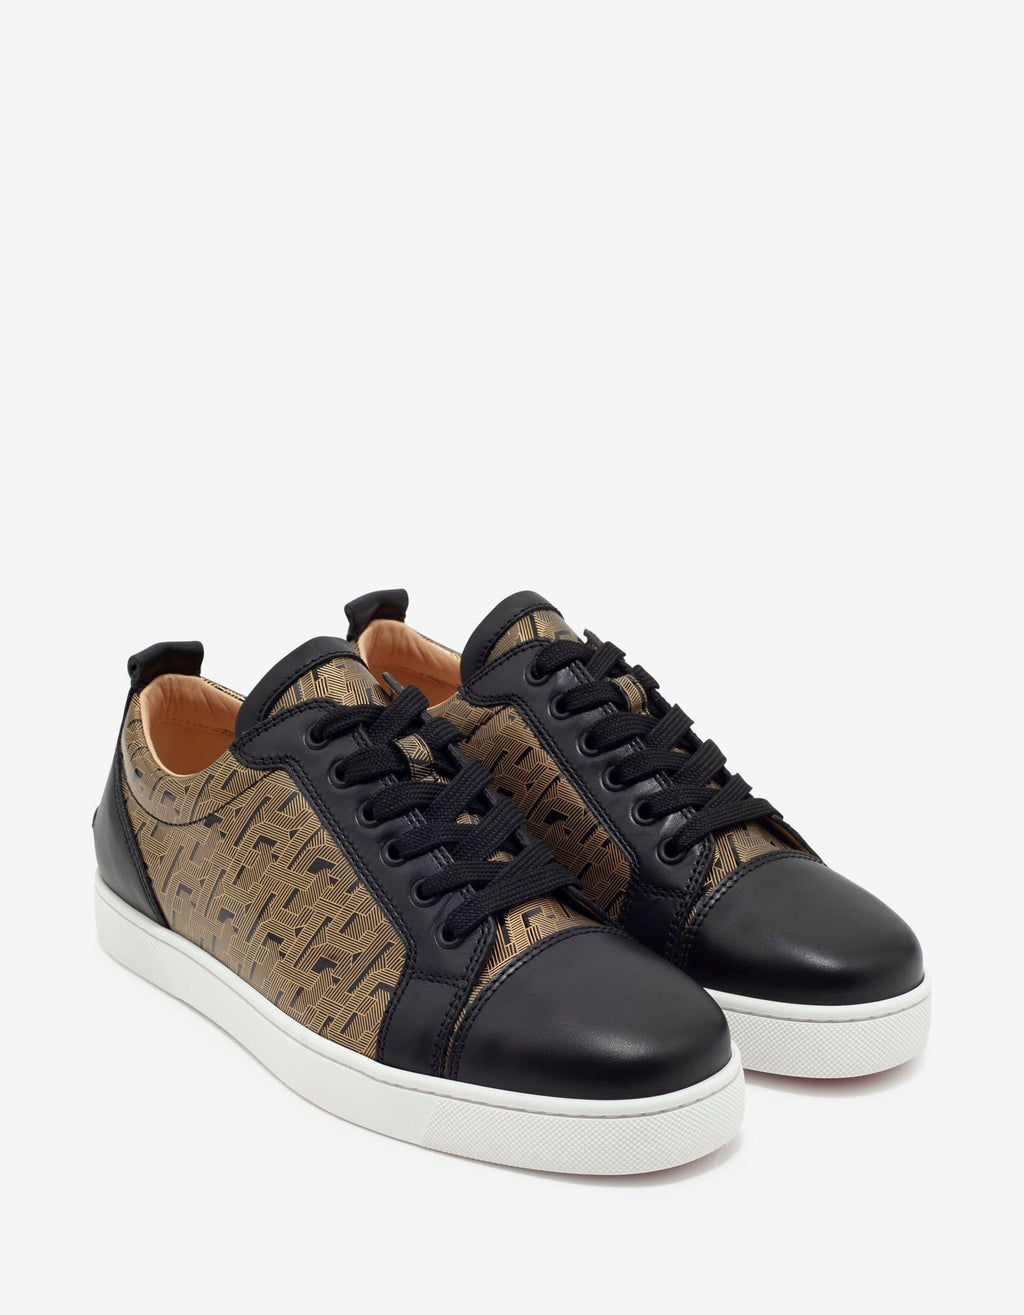 Christian Louboutin Christian Louboutin Louis Junior Black & Gold Patent Leather Trainers